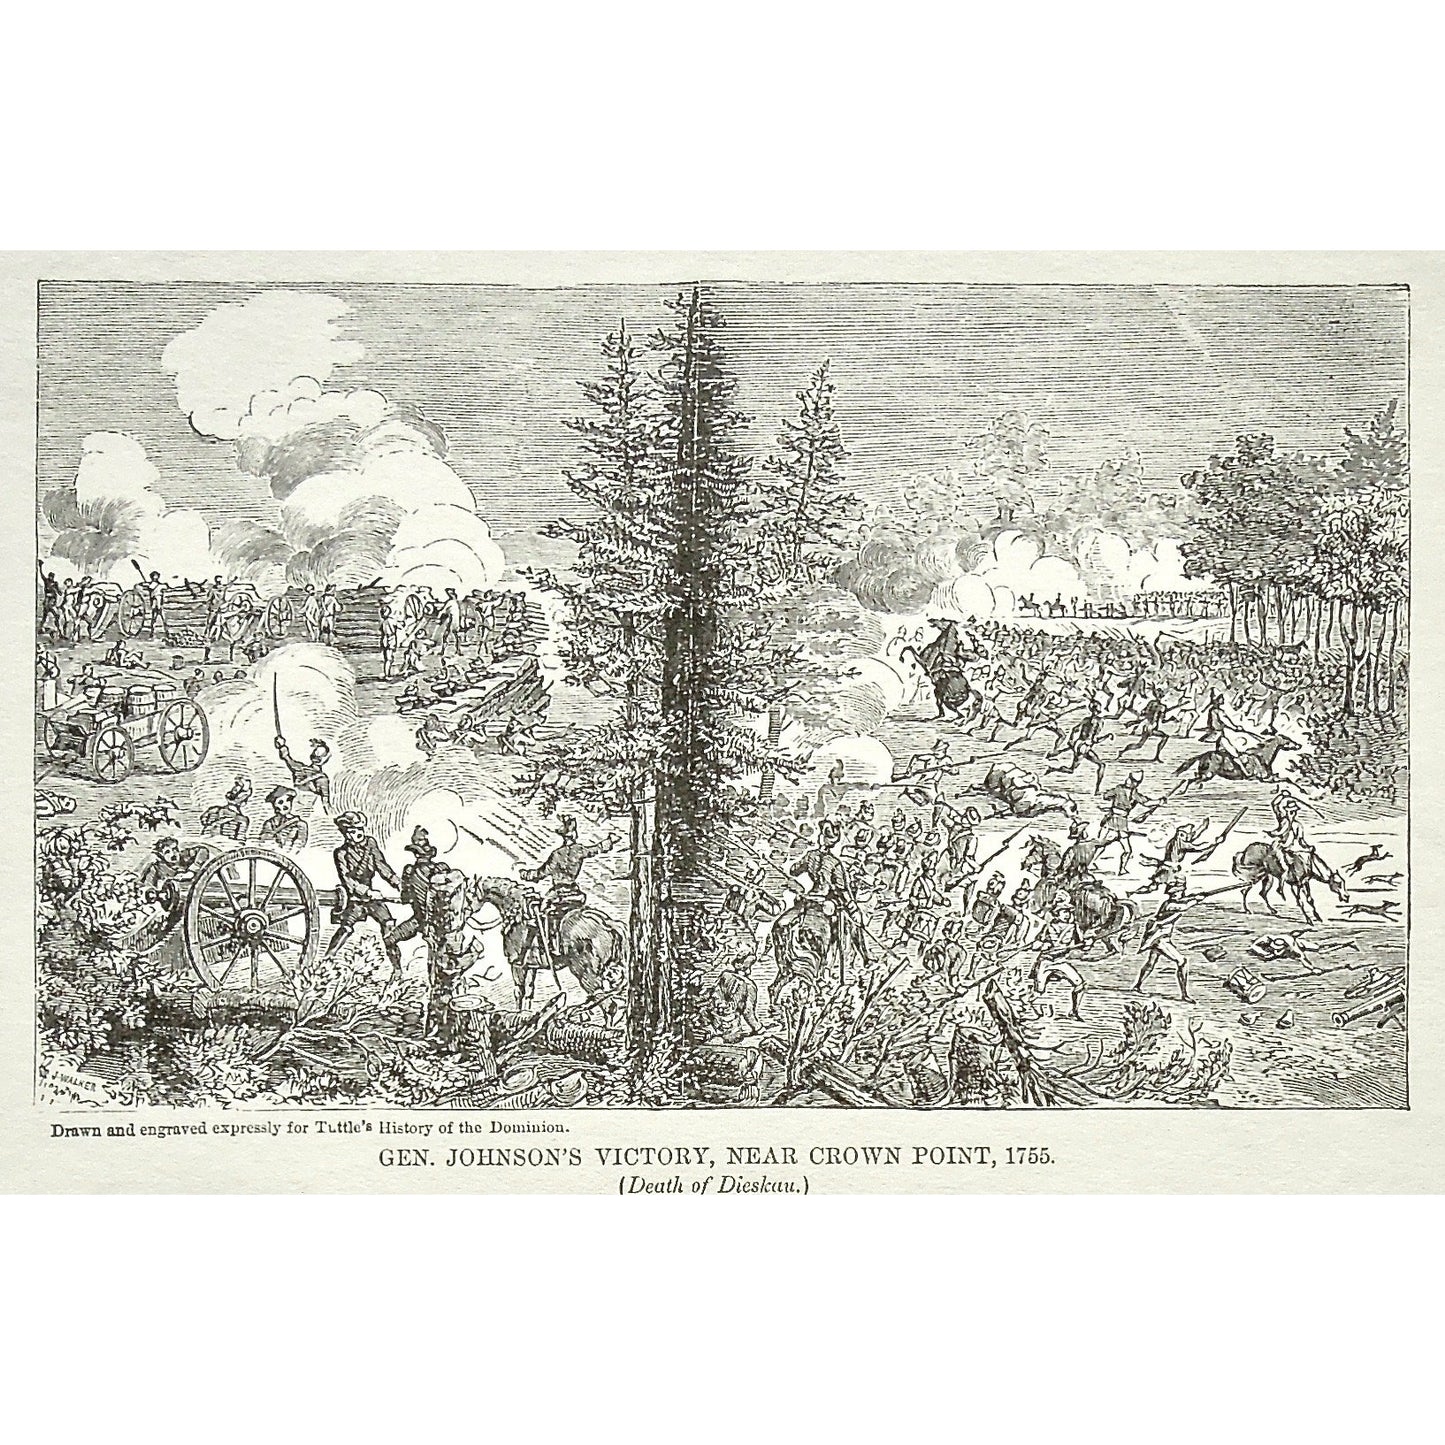 Gen. Johnson's Victory, Near Crown Point, 1755, Death of Dieskau., General Johnson, Death, Dieskau, Battle, Battles, Soldiers, Troops, Cavalry, Weapons, Guns, War, Army, Canons, Swords, Tuttle, Charles Tuttle, History of the Dominion, Popular History of the Dominion, Downie, Bigney, History, Dominion, Canada, Canadian History, Antique, Antique Print, Steel Engraving, Engraving, Prints, Printmaking, Original, Rare prints, rare books, Wall decor, Home decor, office art, Unique, 1877, Old Prints, Historical,